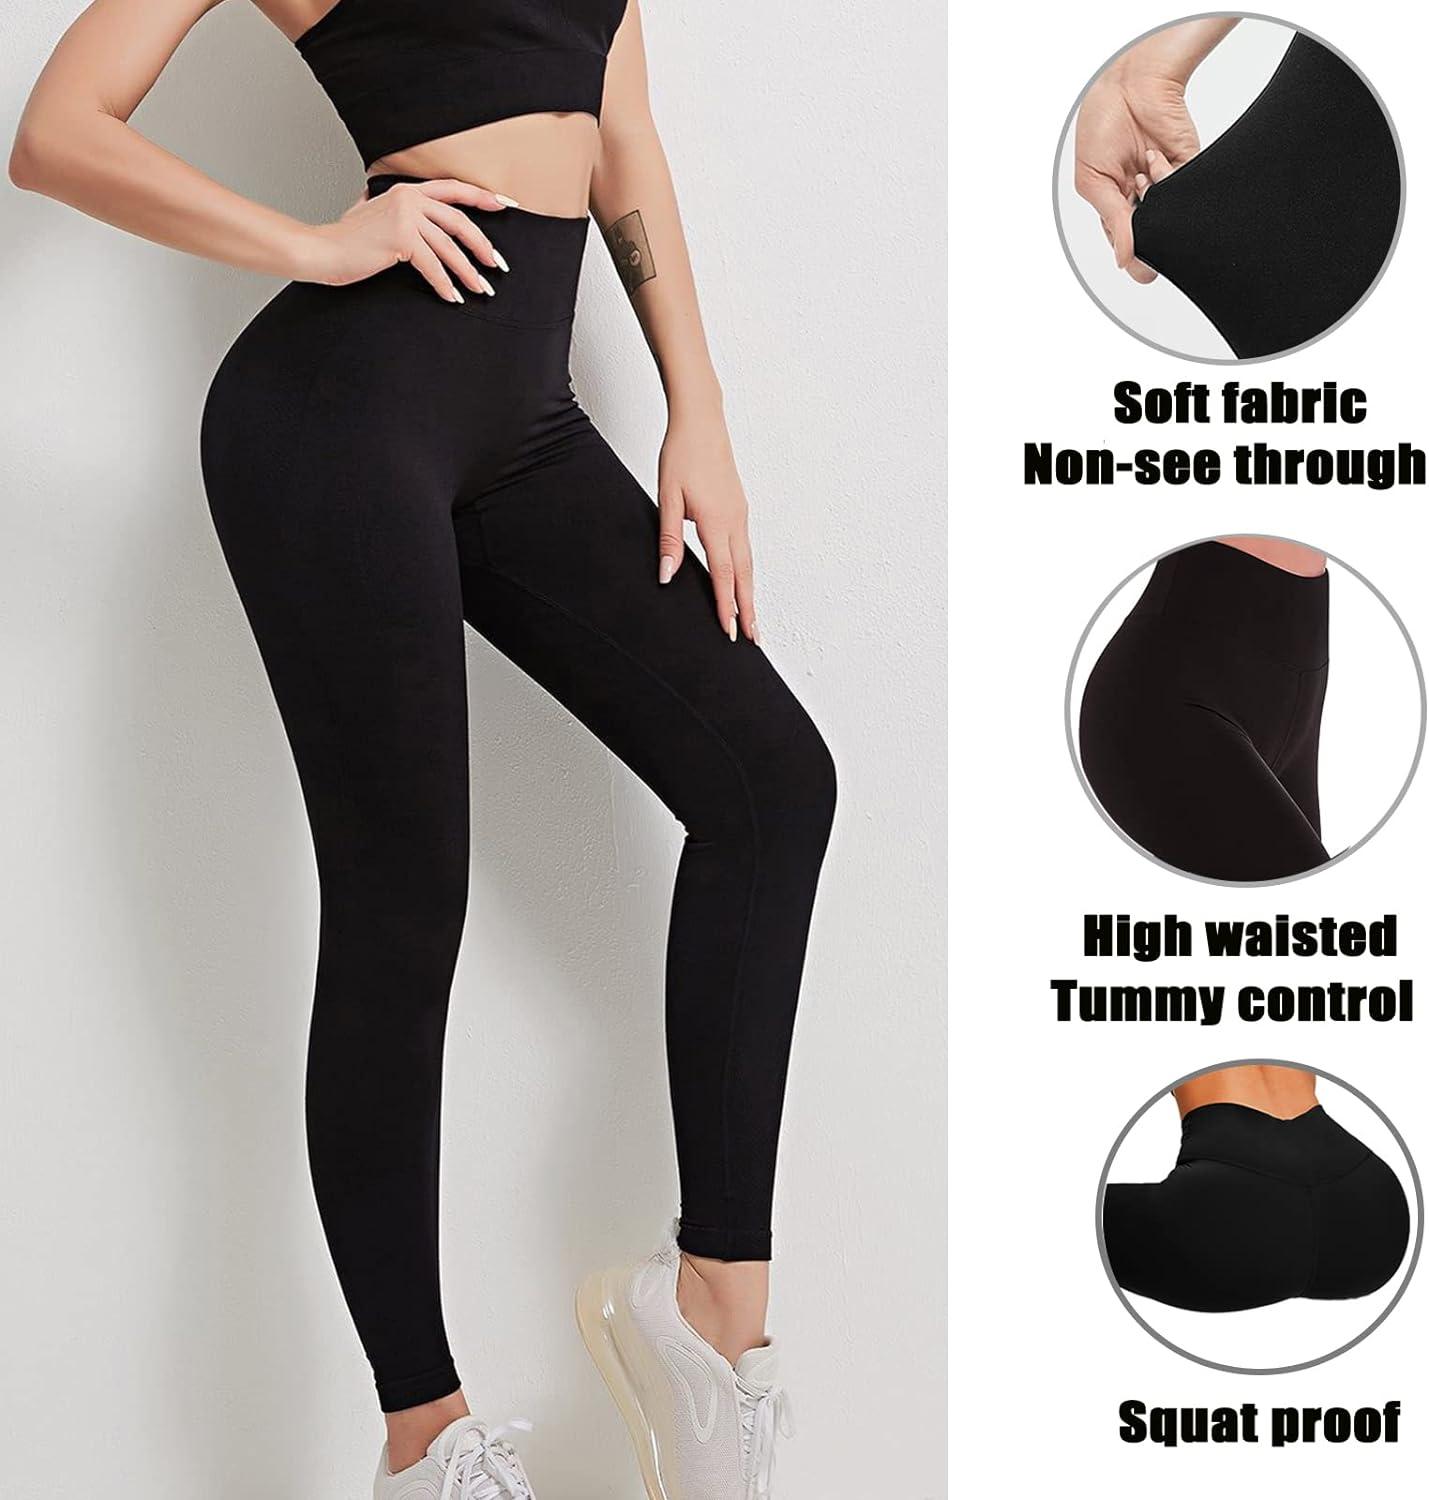 Womens High Waisted Leggings Buttery Soft Tights Opaque Casual Sports  Running